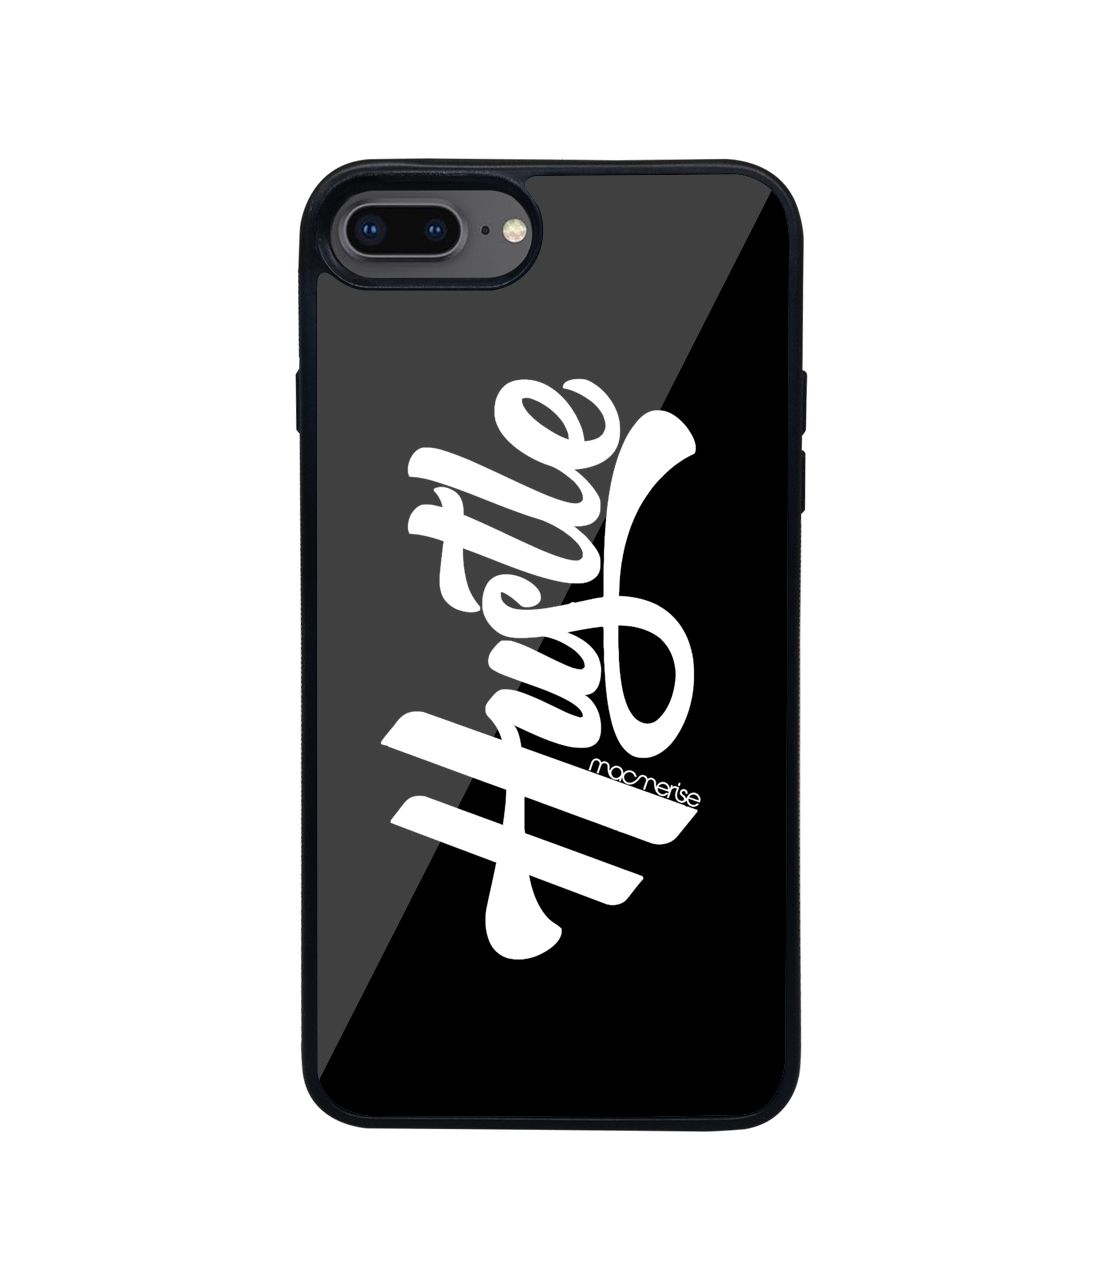 Hustle Black - Glass Phone Case for iPhone 8 Plus